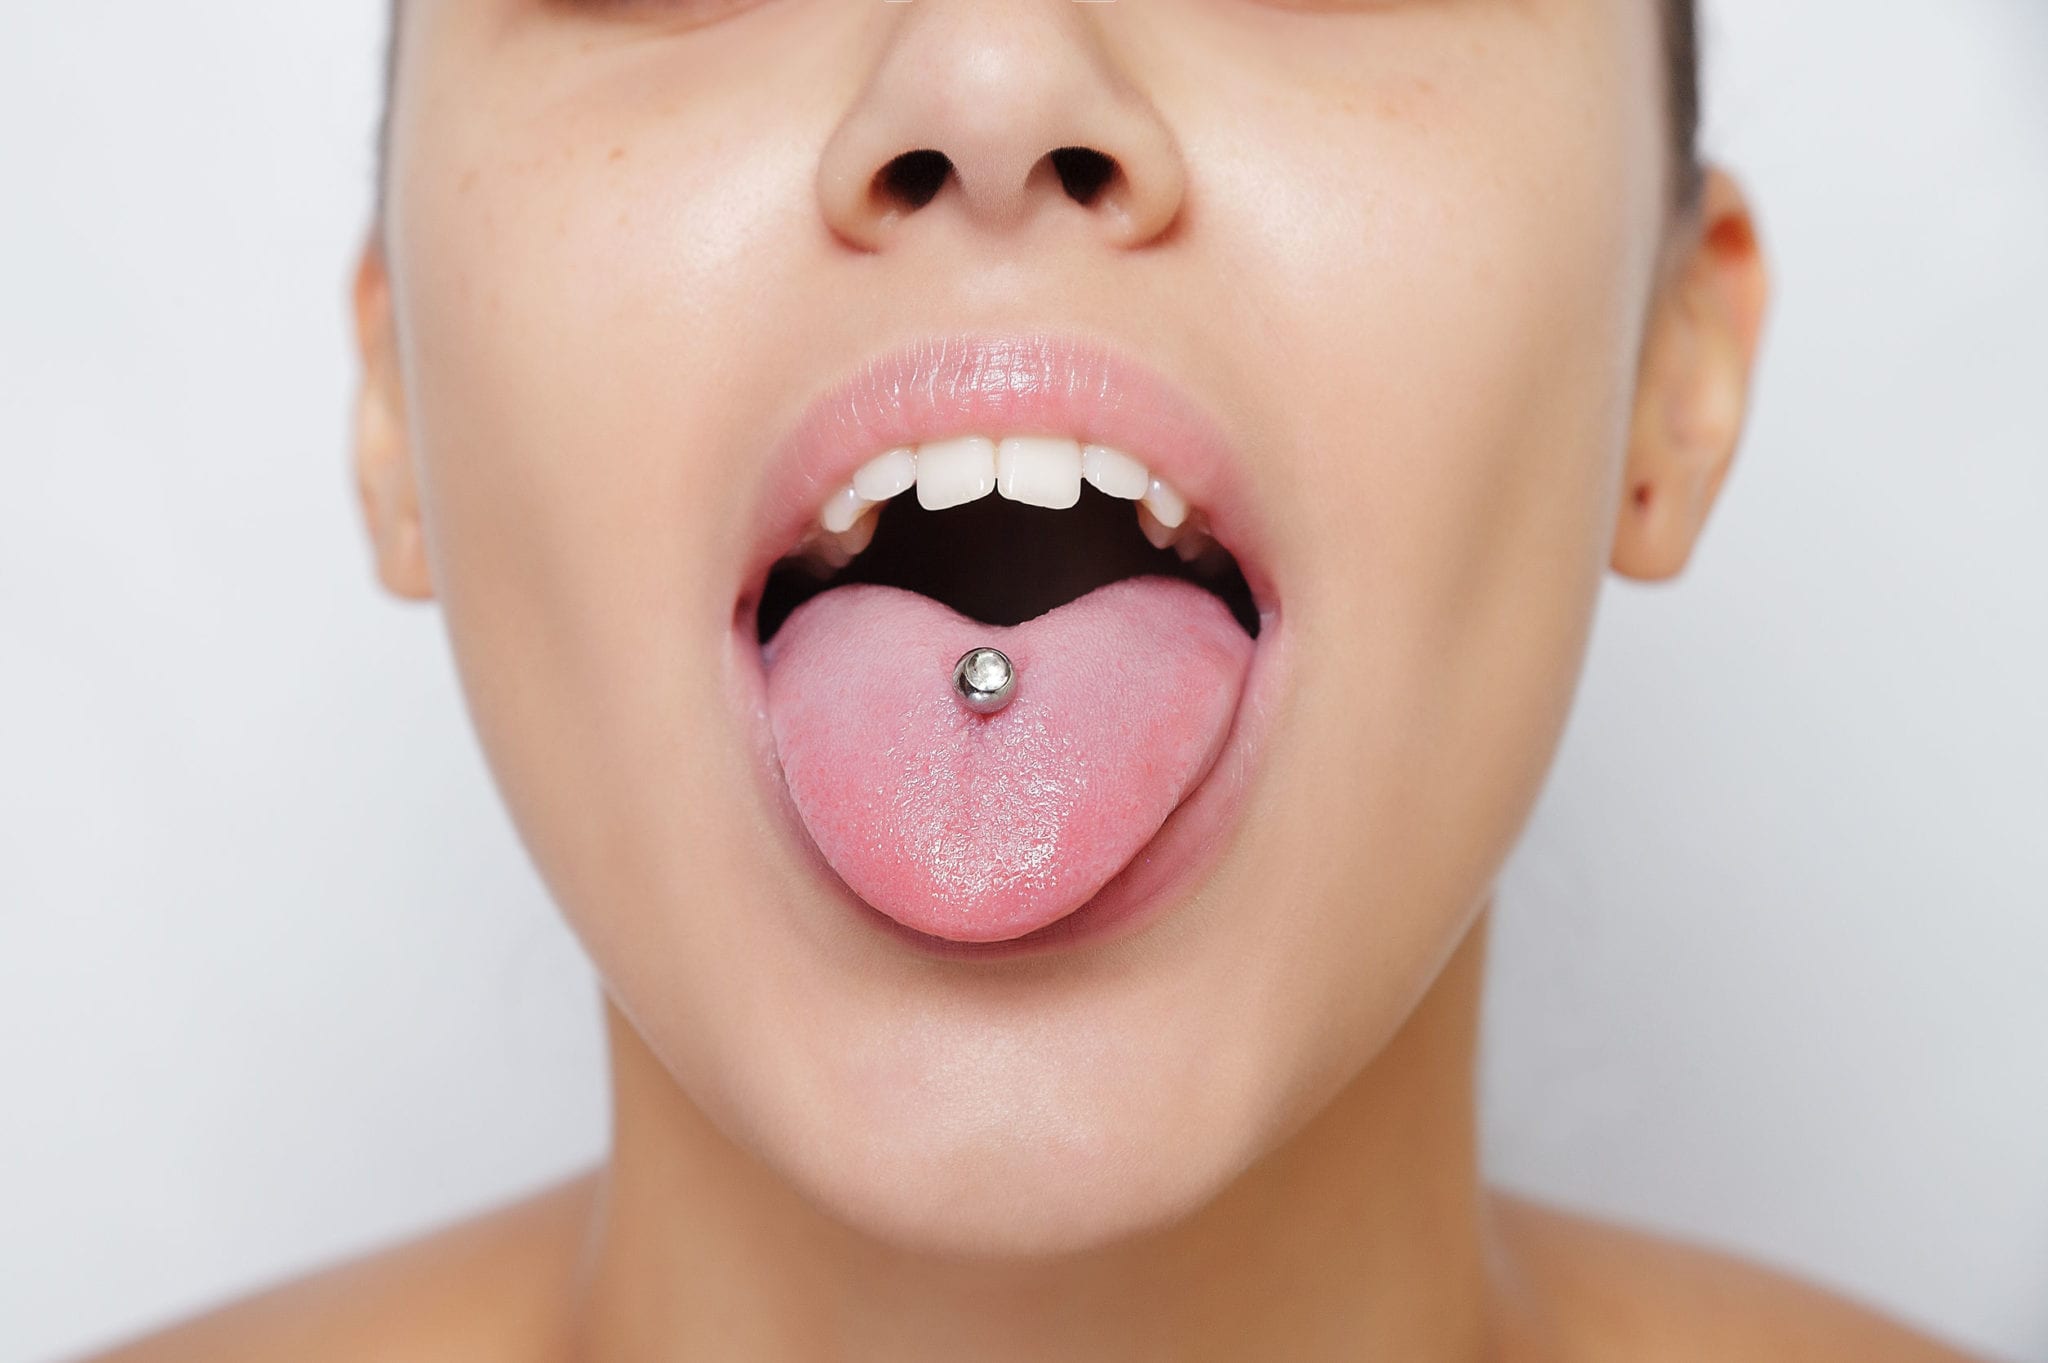 How Oral Piercings Can Impact the Health of Your Mouth